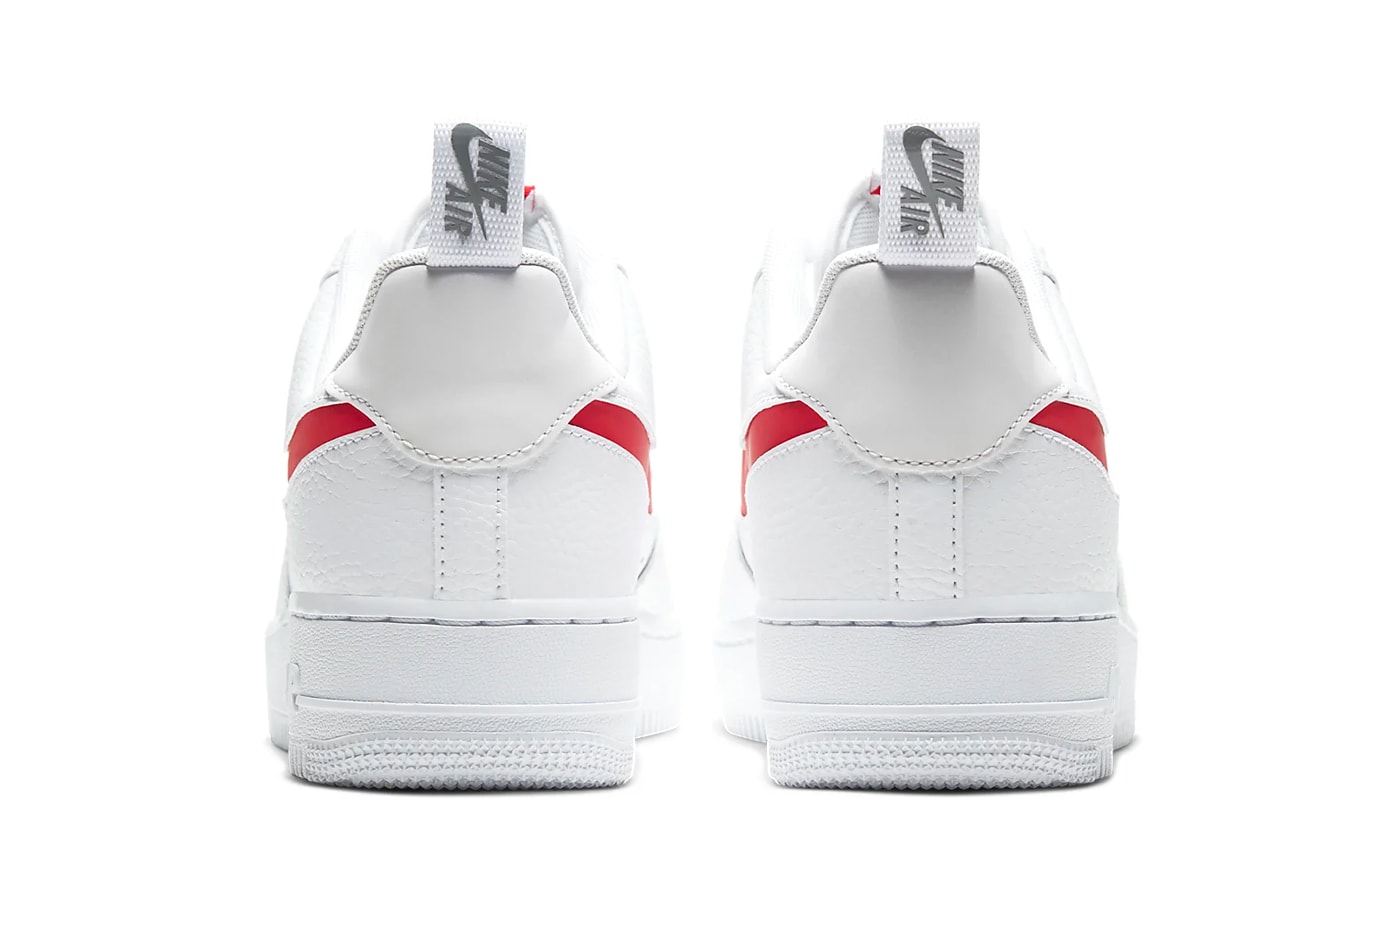 Nike Air Force 1 LV8 Utility White University Red Black Light Smoke Grey menswear streetwear shoes footwear kicks trainers runners spring summer 2020 collection CW7579 001 101